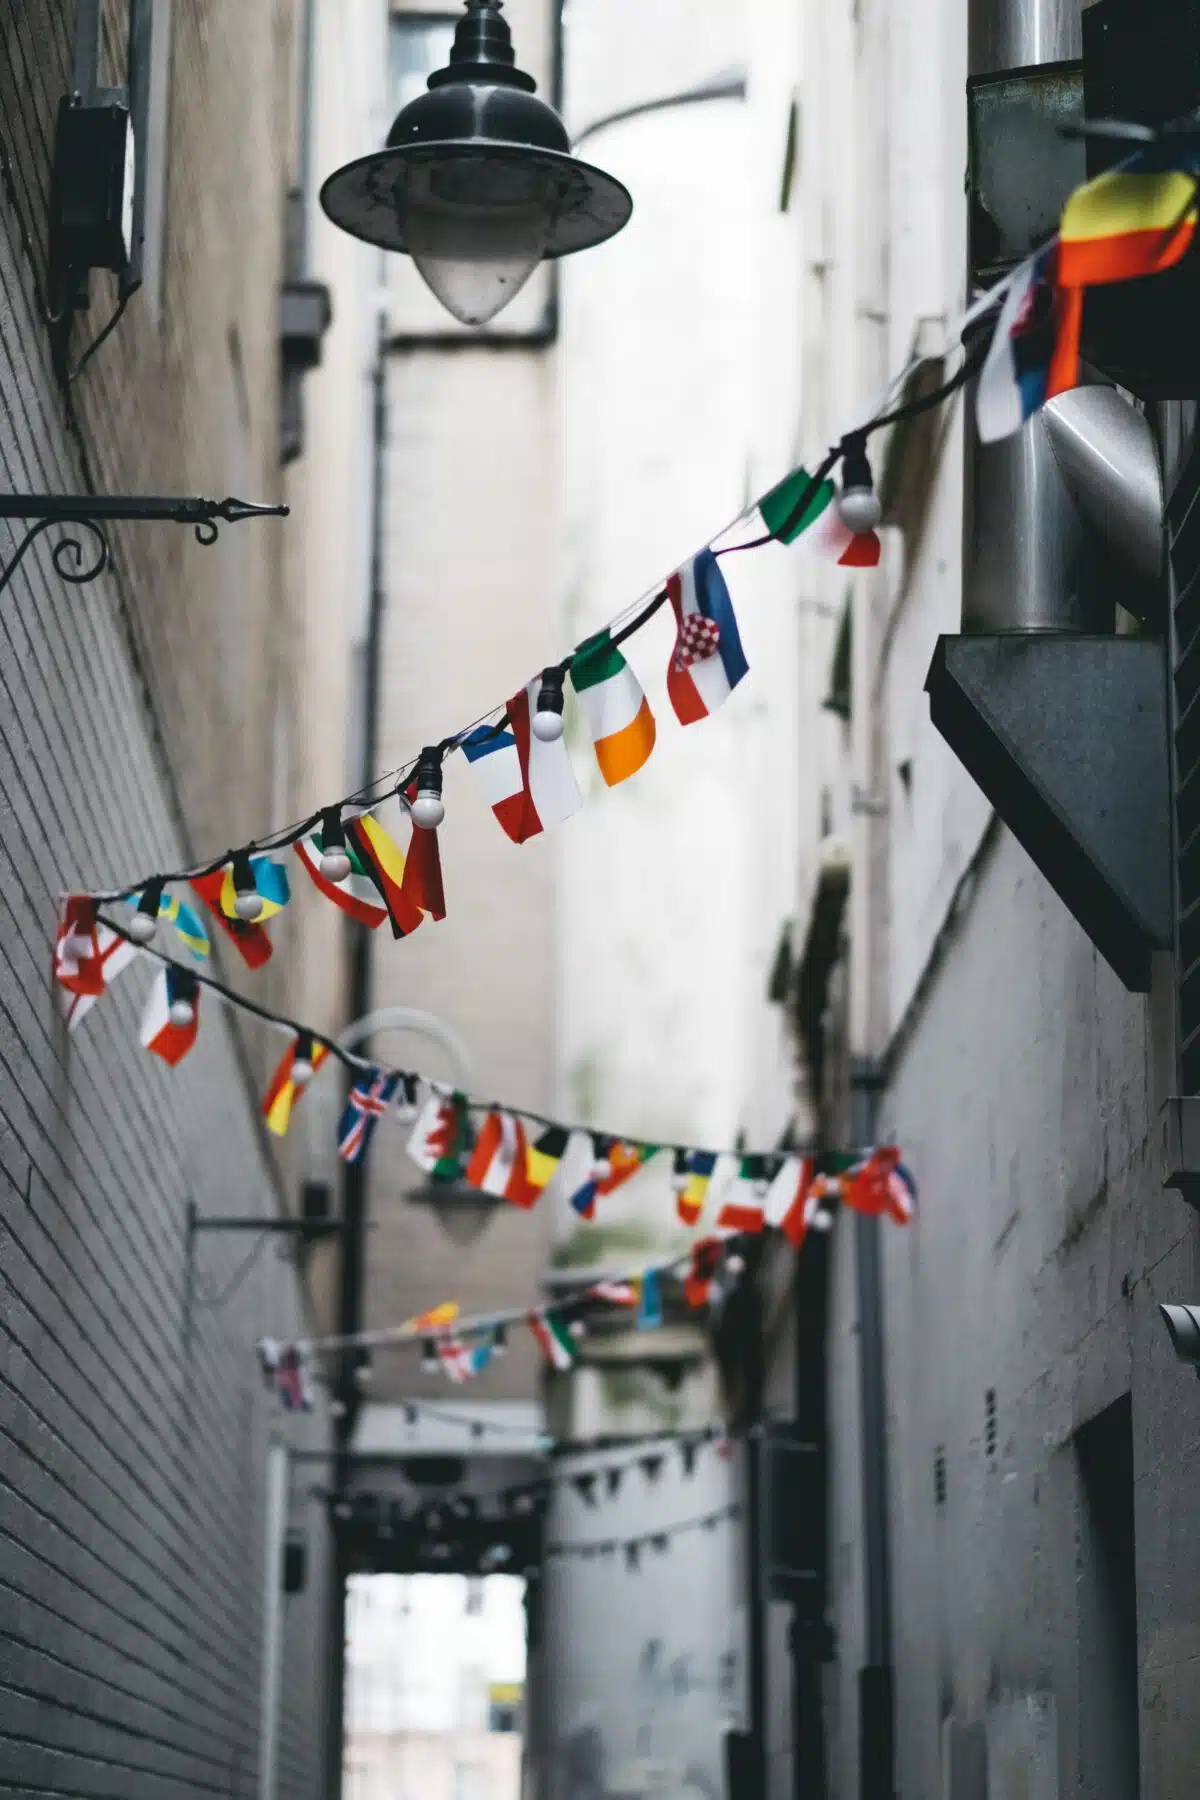 An alley in a city with small country flags strung between either side of it